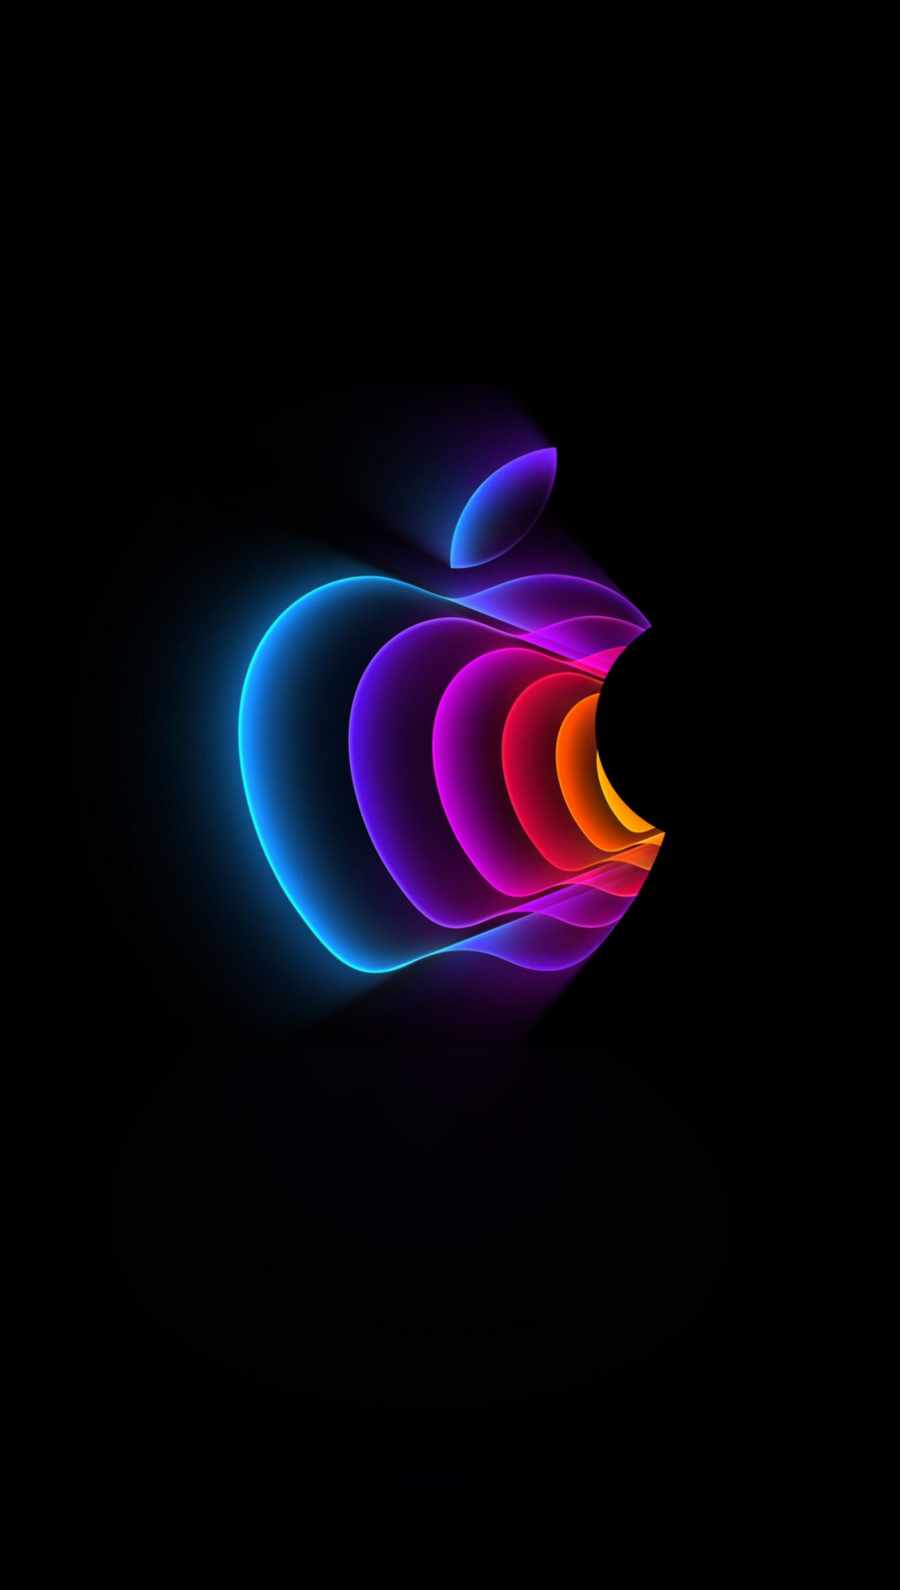 Apple 3D HD IPhone Wallpaper - IPhone Wallpapers : iPhone Wallpapers